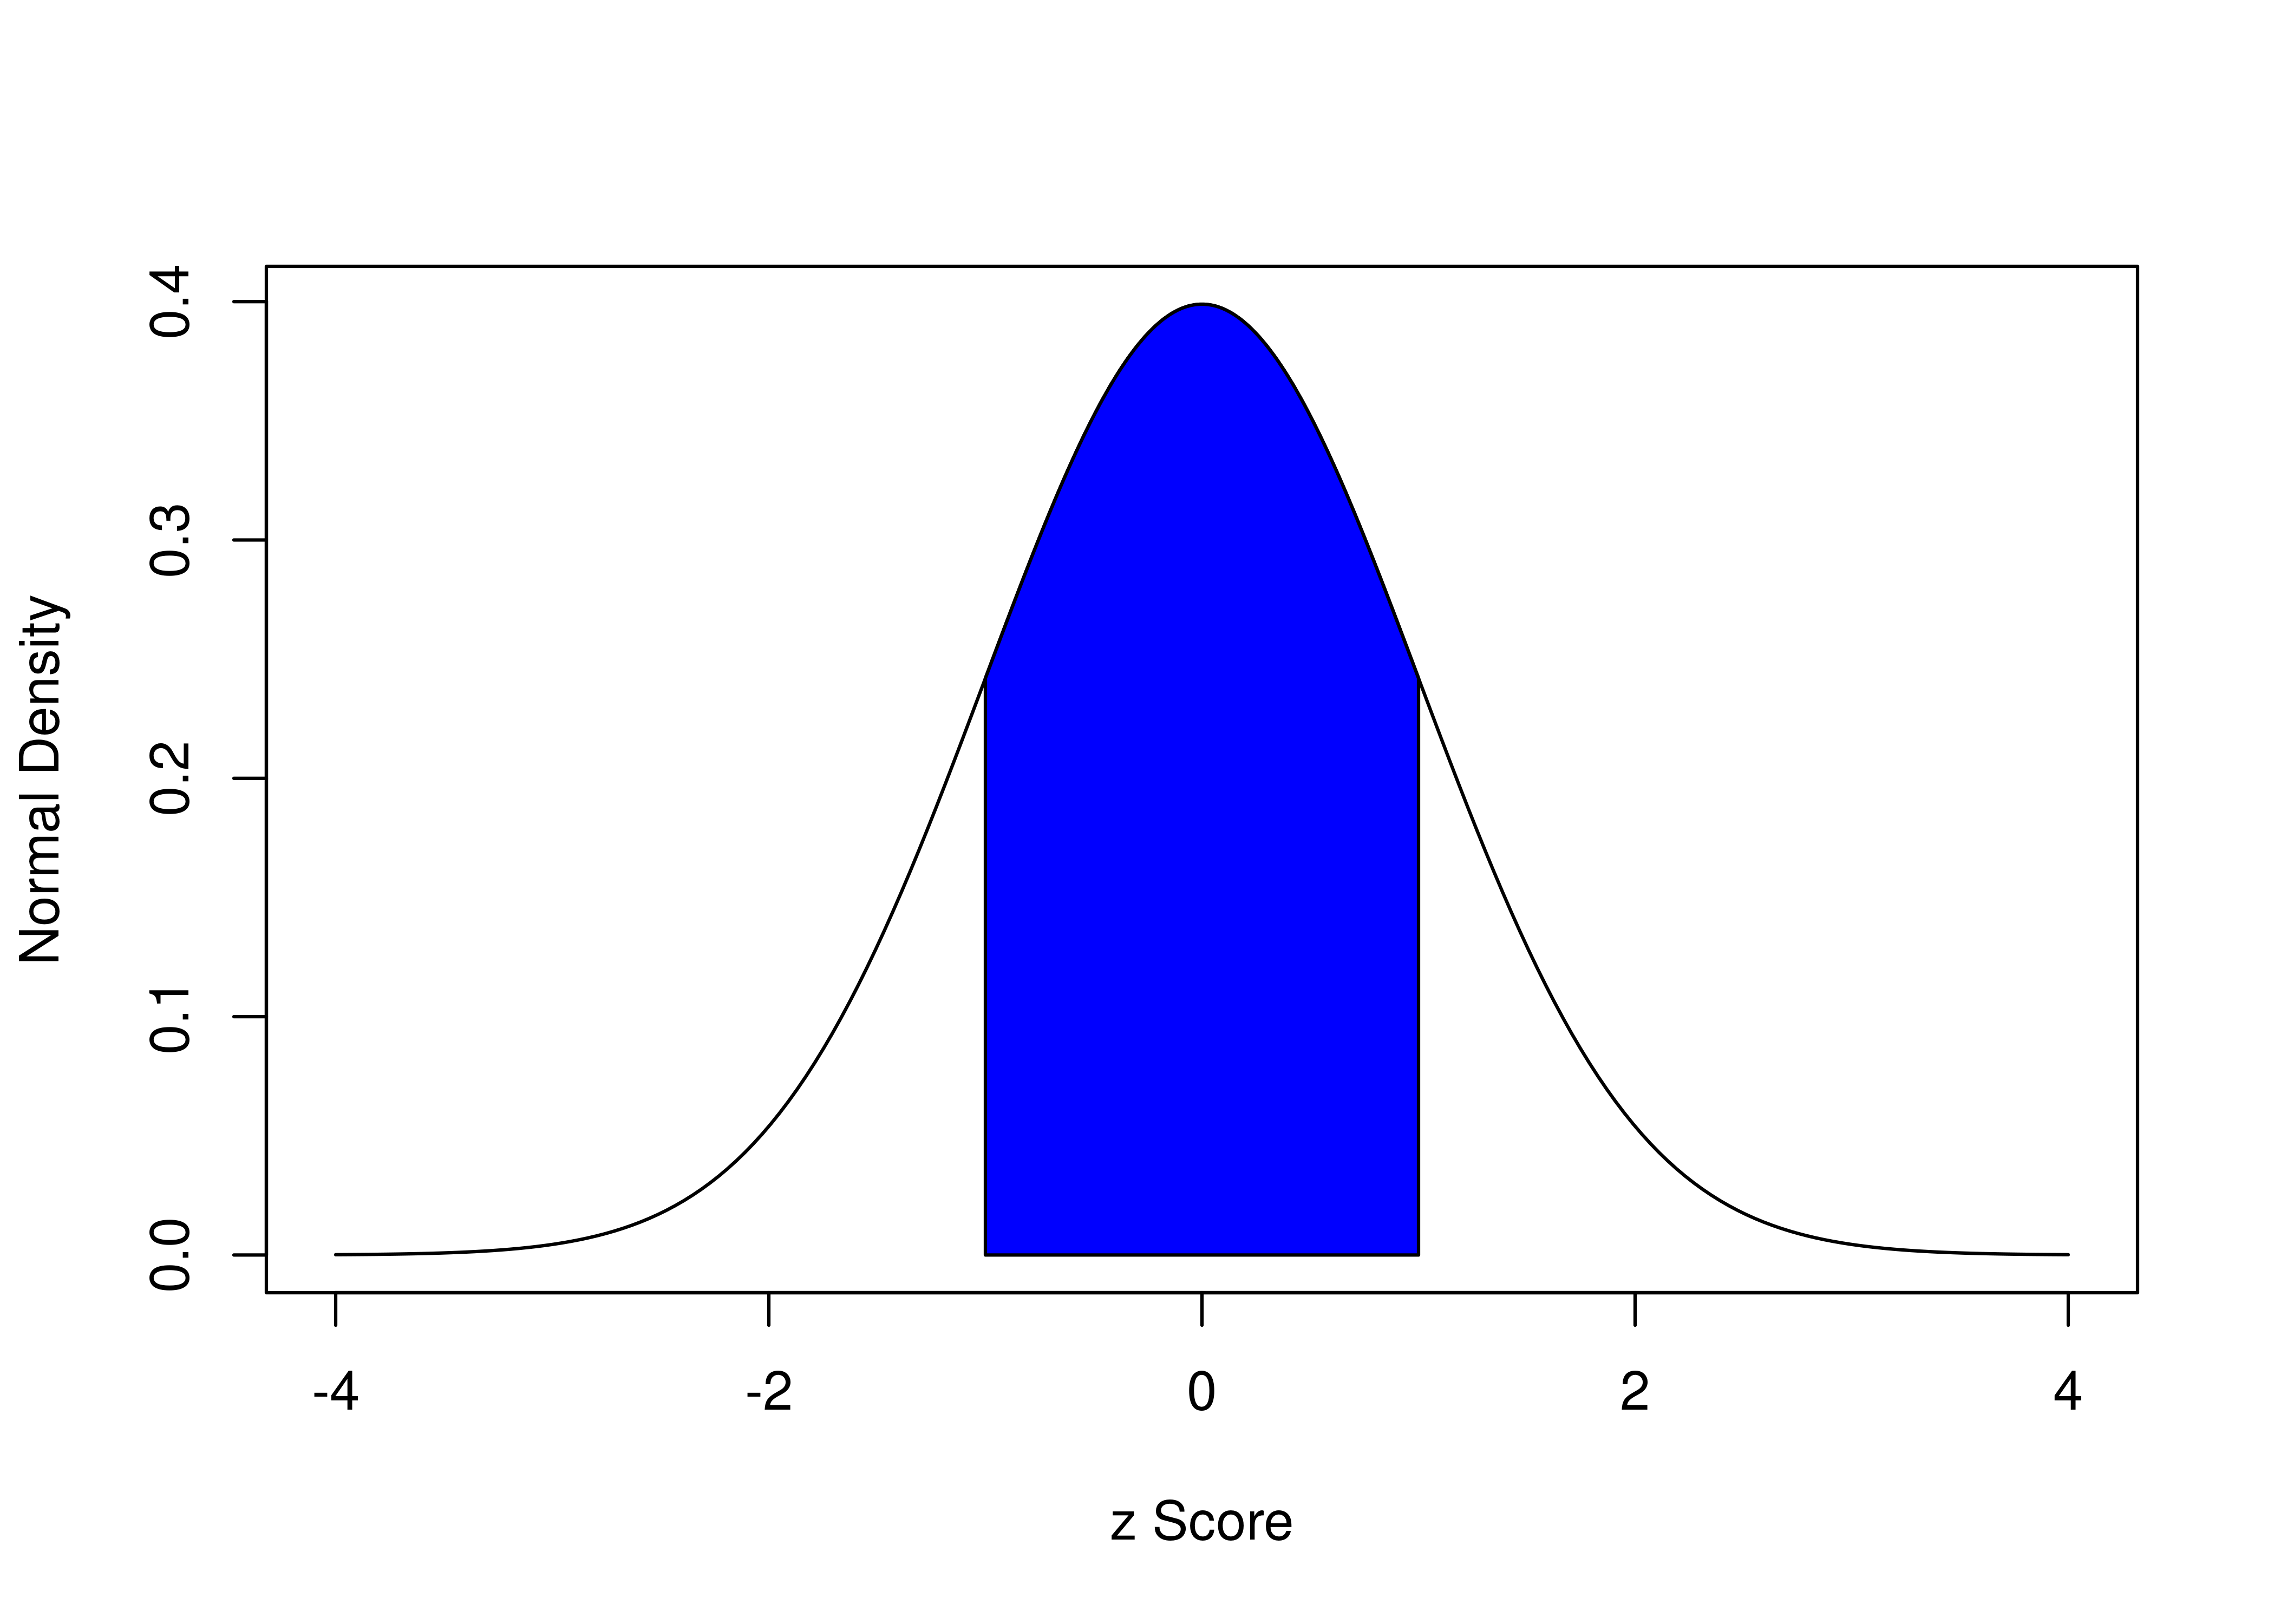 Density of Standard Normal Distribution. The blue region represents the area within one standard deviation of the mean.